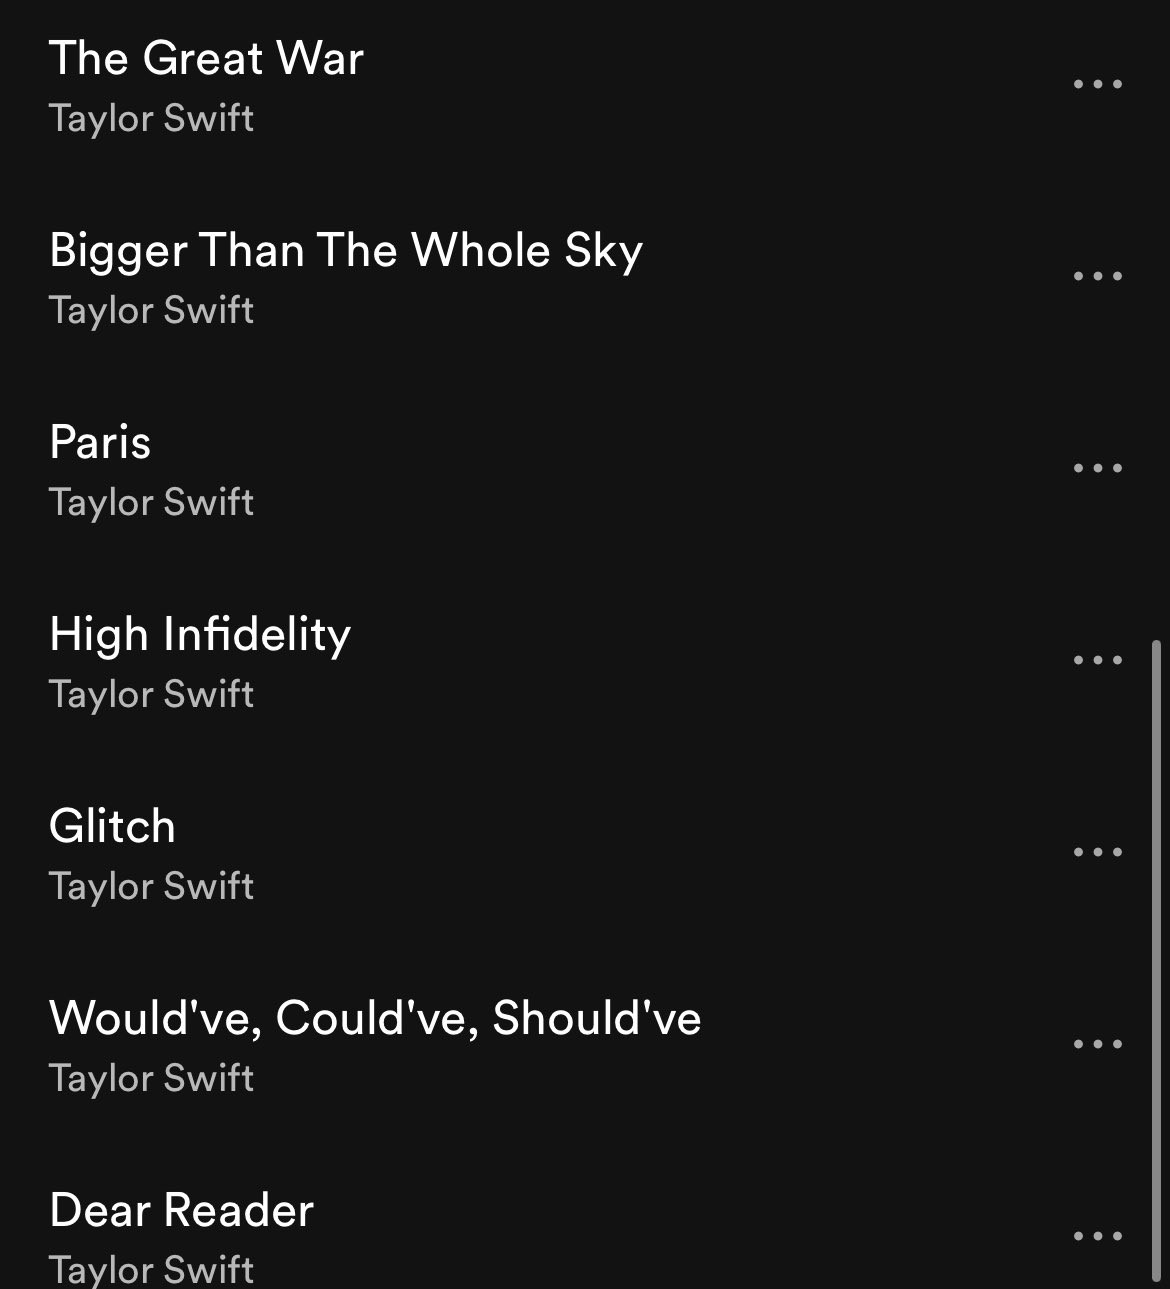 Taylor Swift 7 new songs